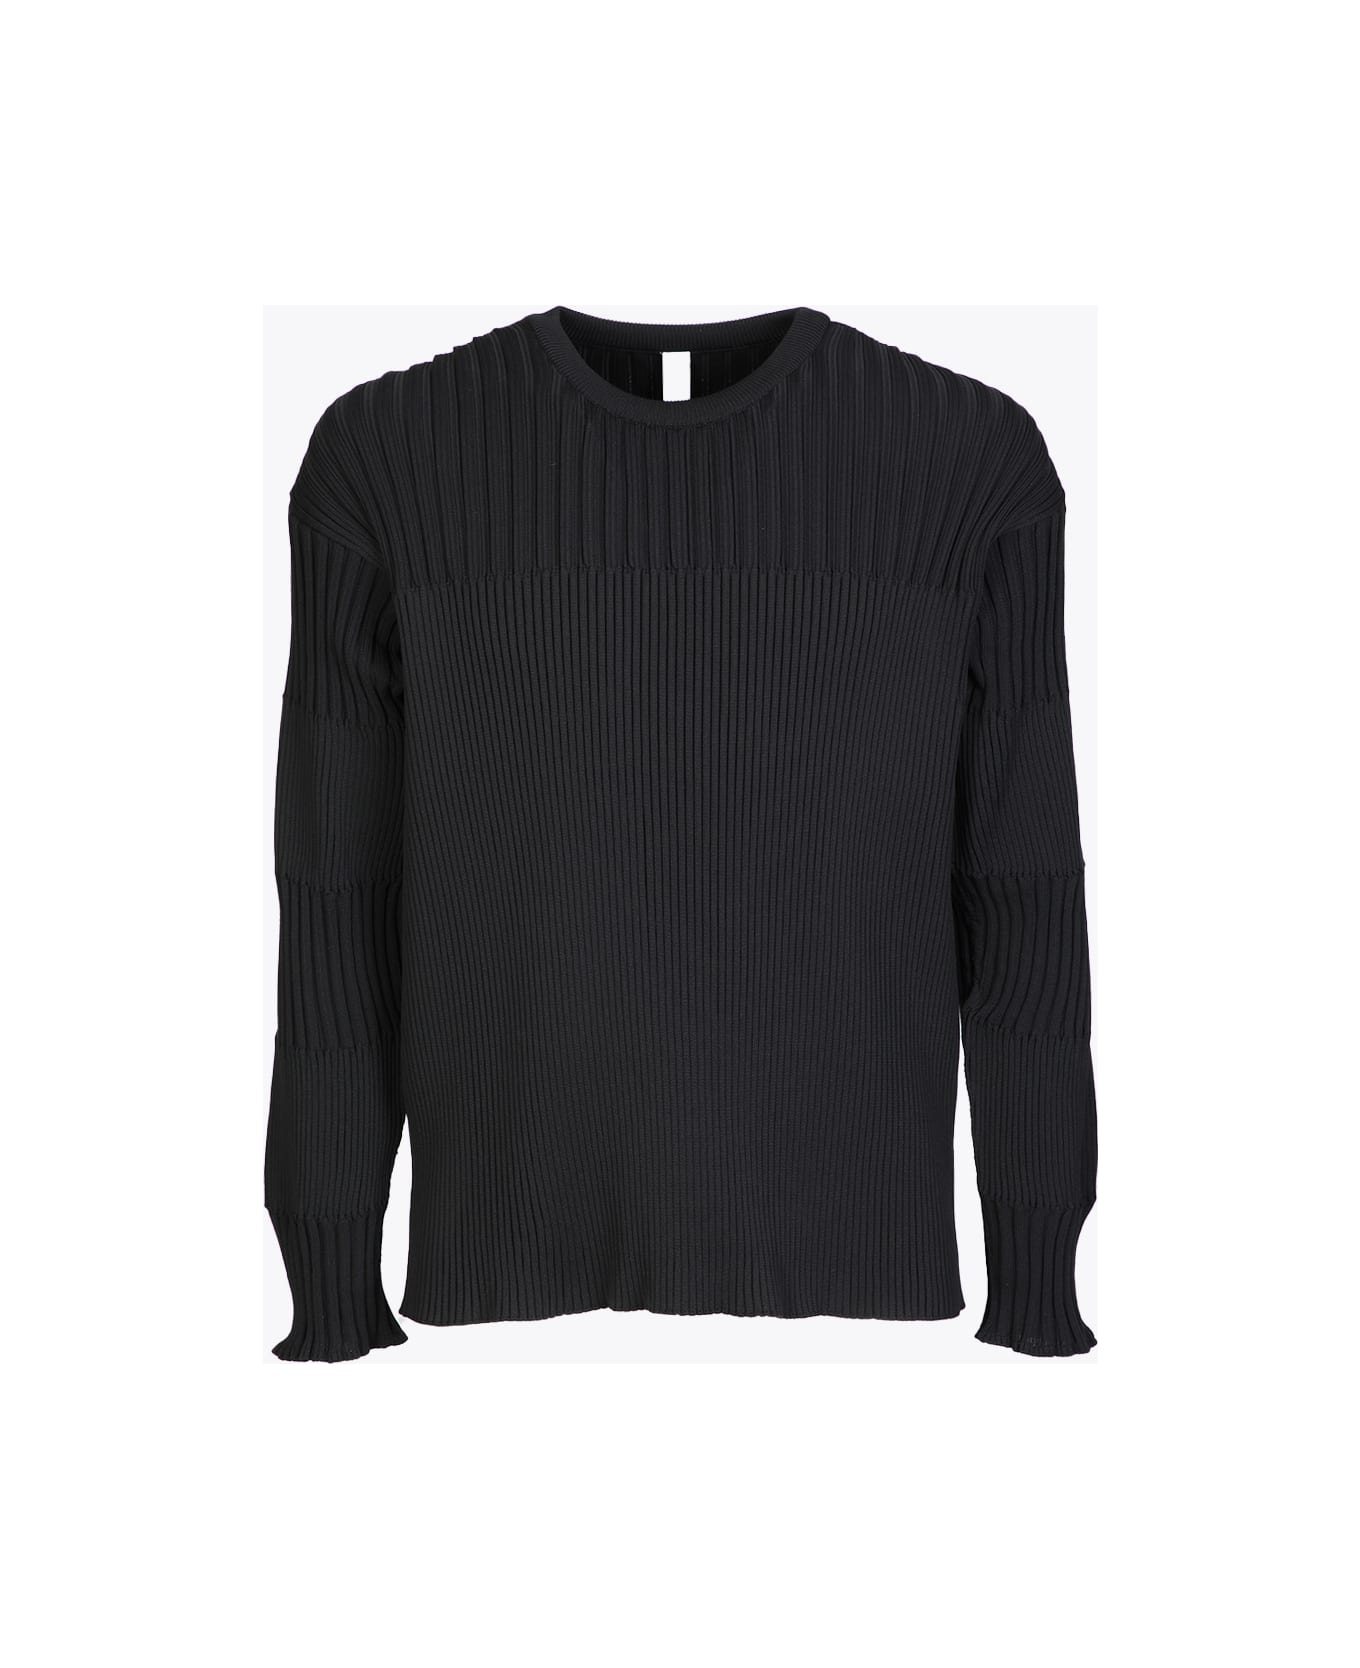 CFCL Fluted Top 3 Black rib-knitted curled top - Fluted top